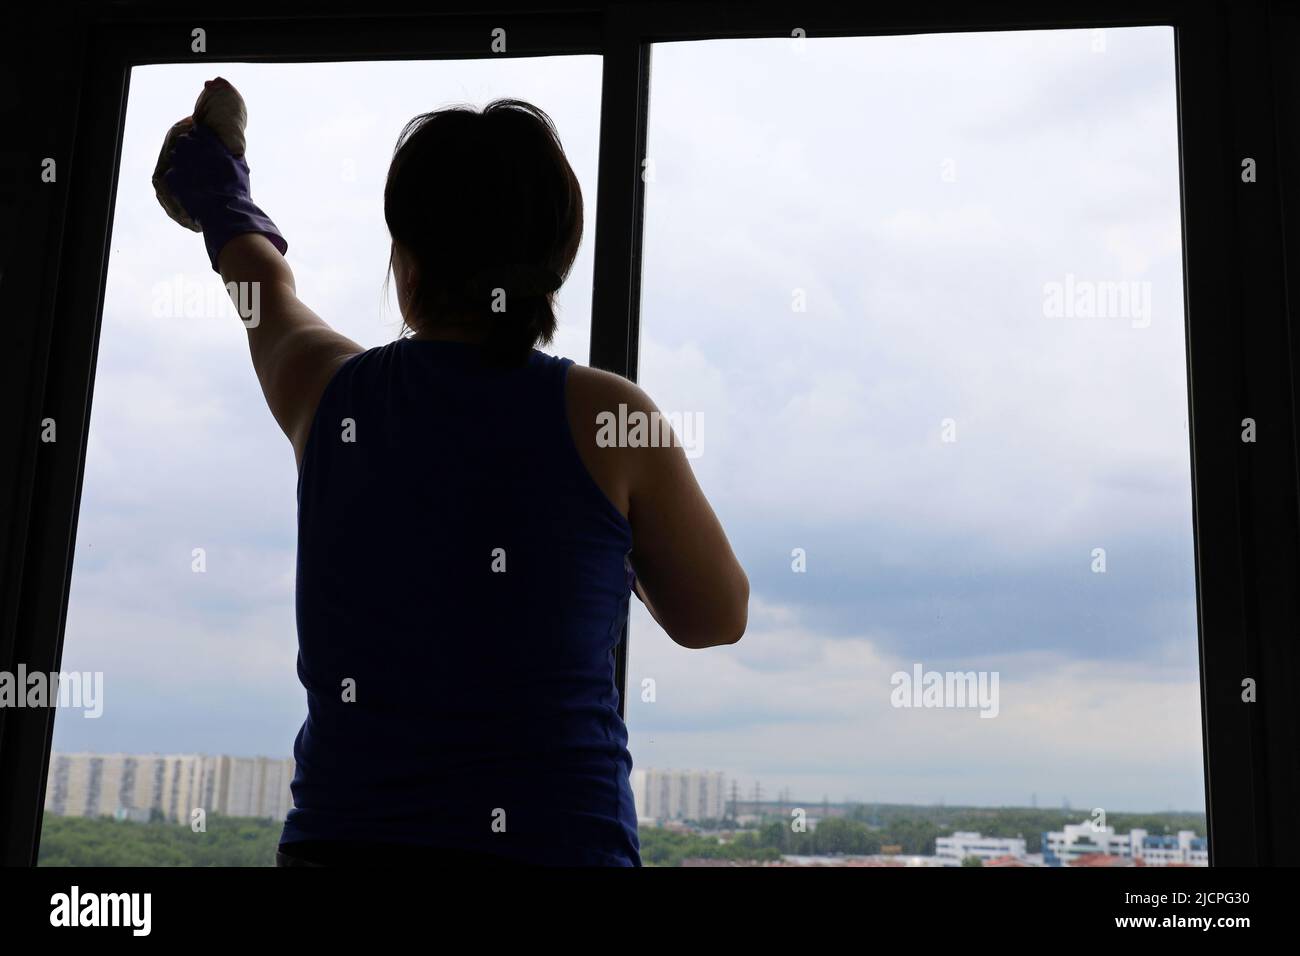 Window cleaning, silhouette of a woman washing the glass, inside view to summer city Stock Photo